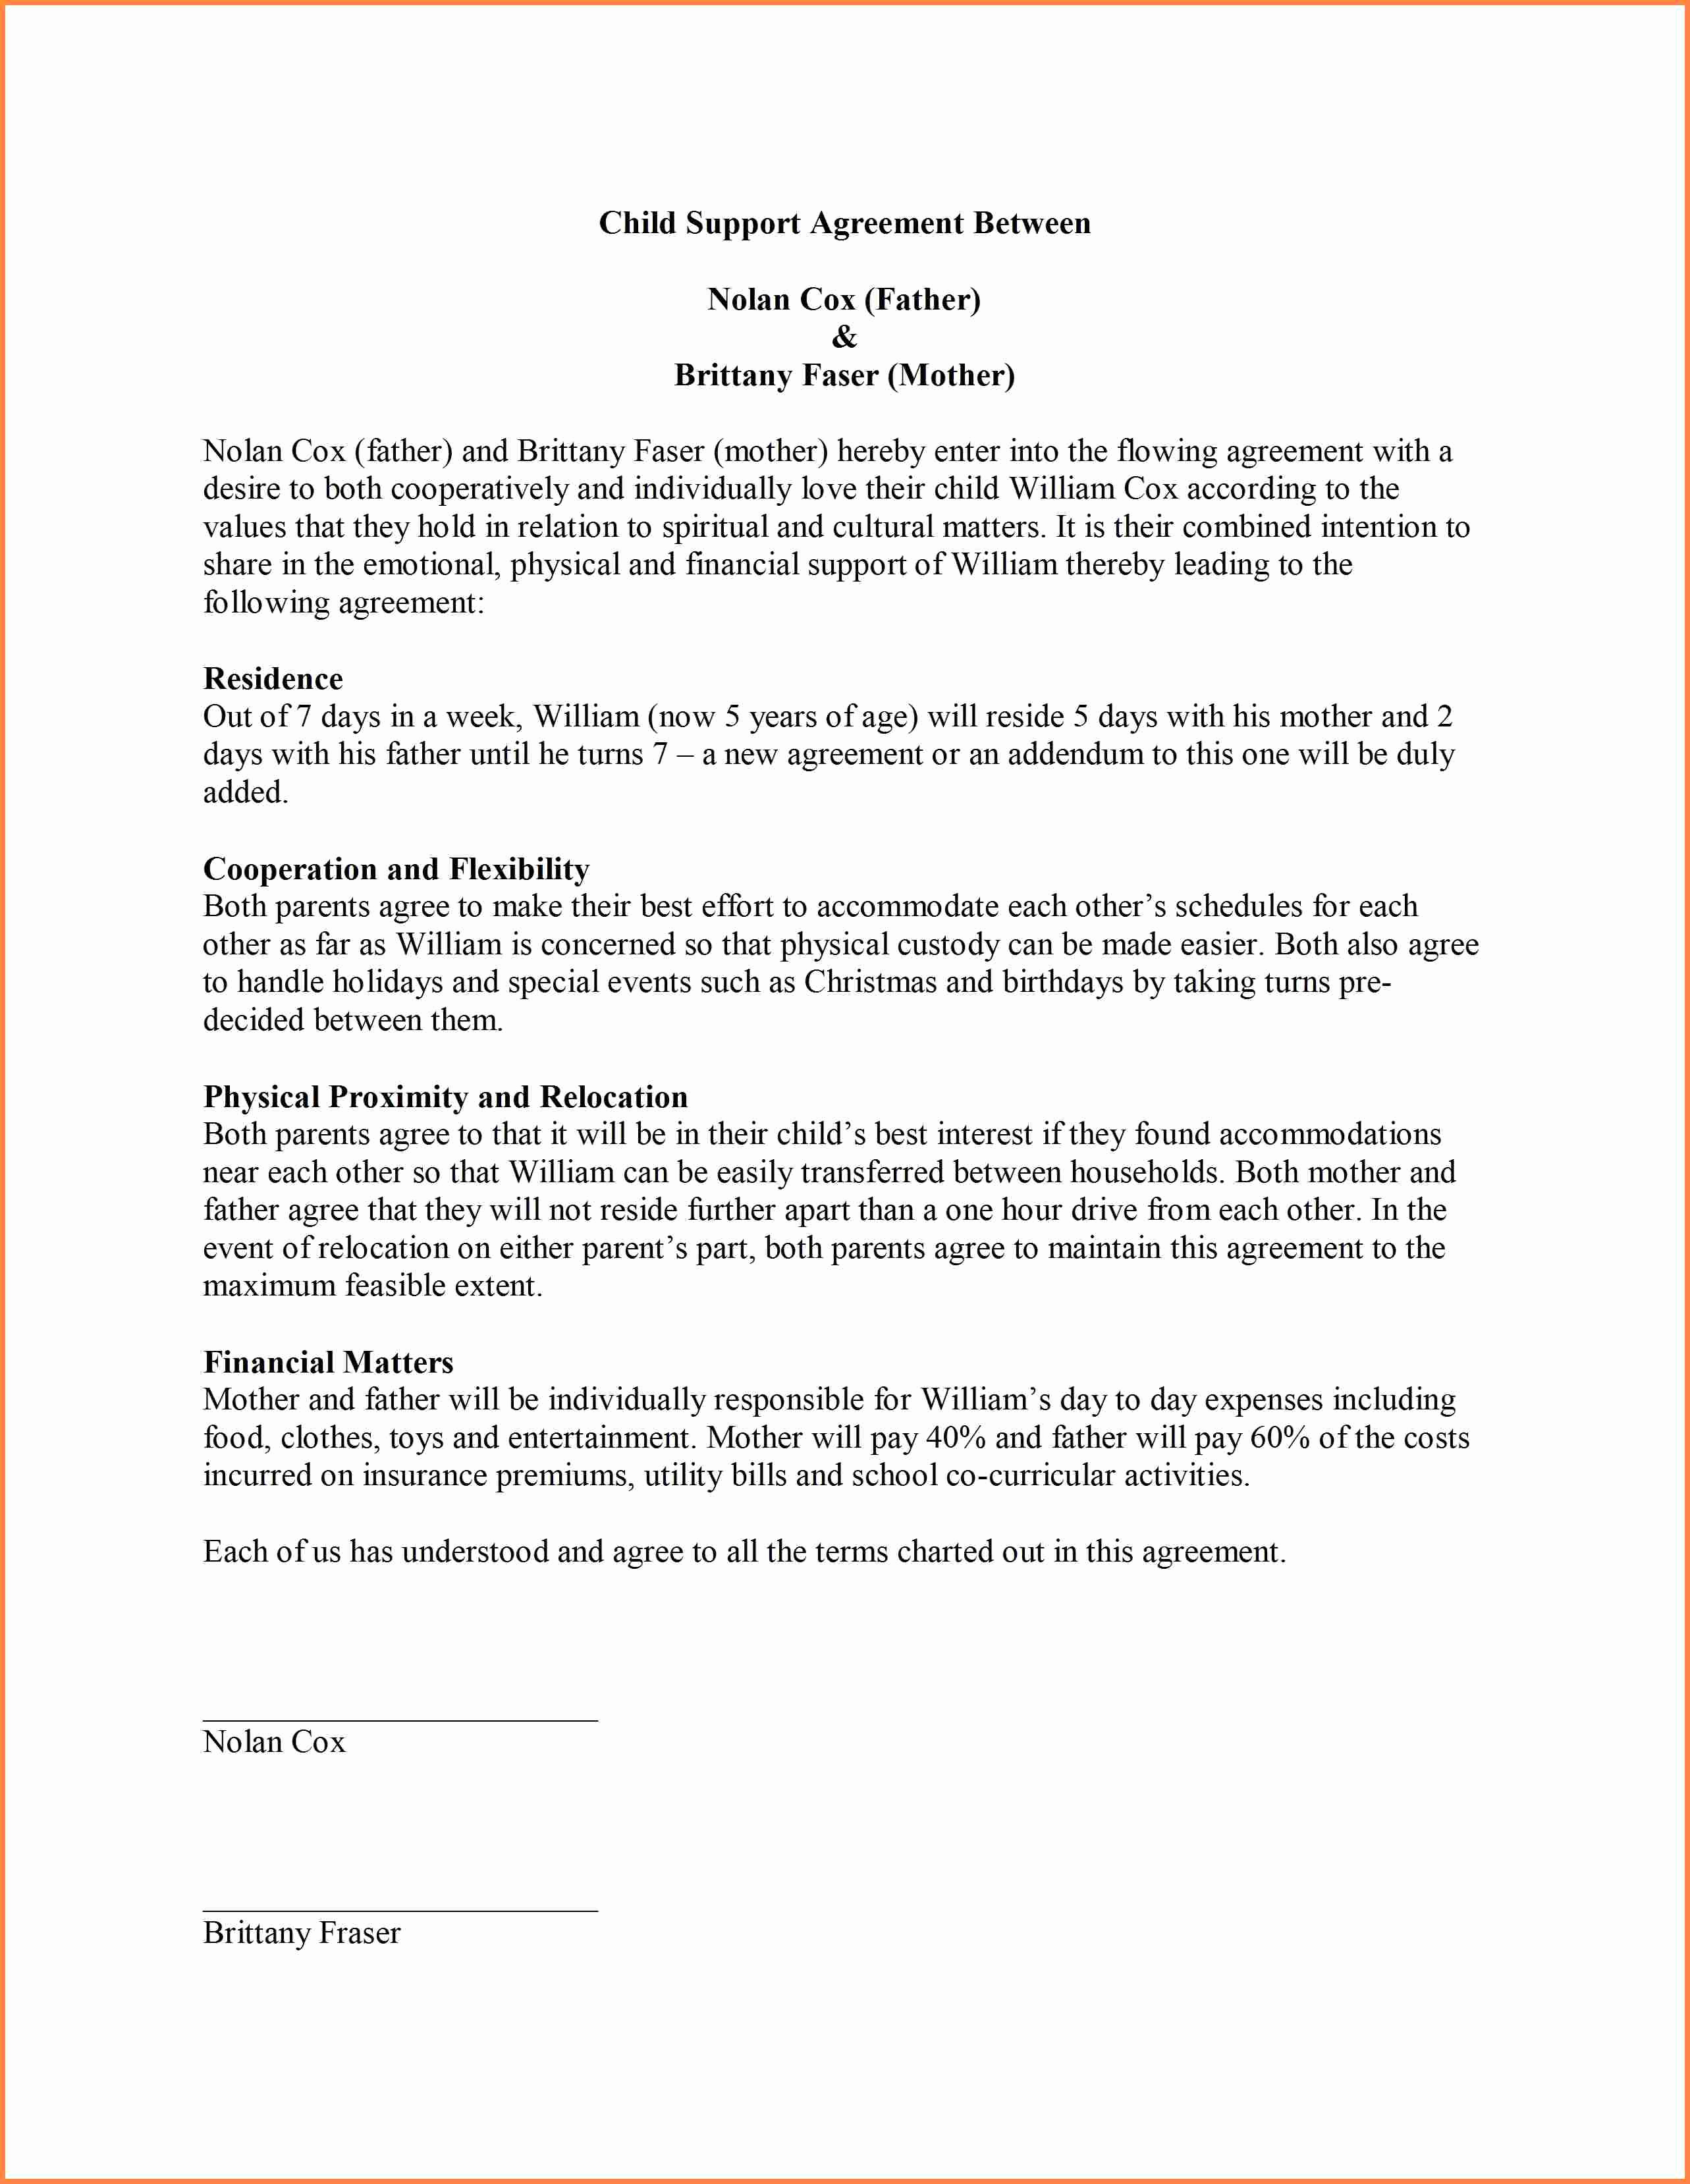 Sample Child Support Agreement 30 Child Support Agreement Template Tate Publishing News